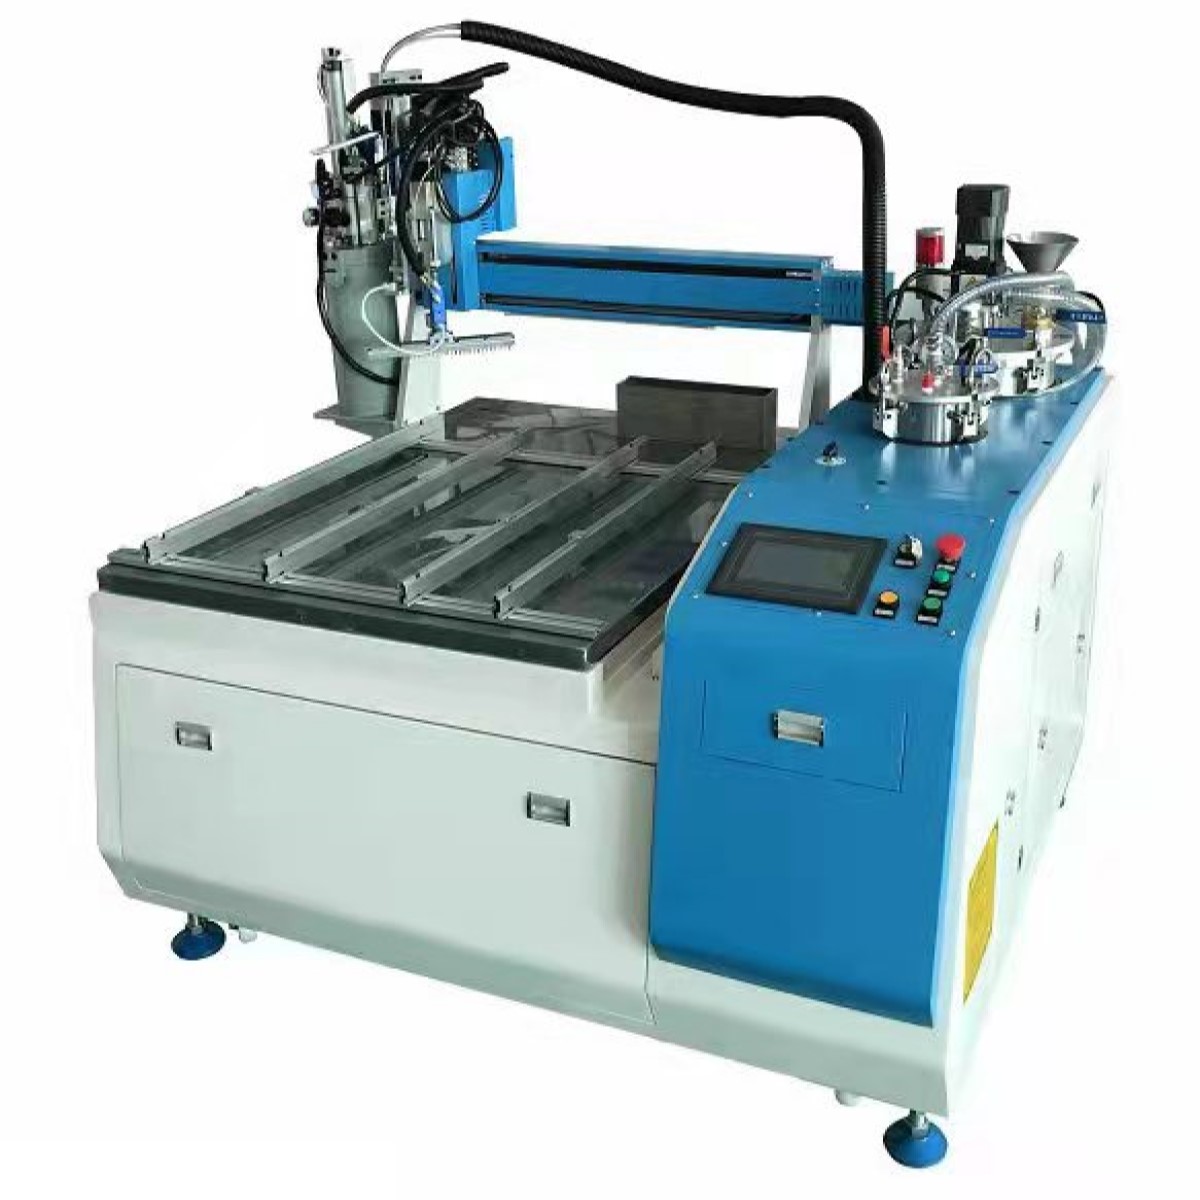 MD-810 Stand alone potting machine for two-component fluid